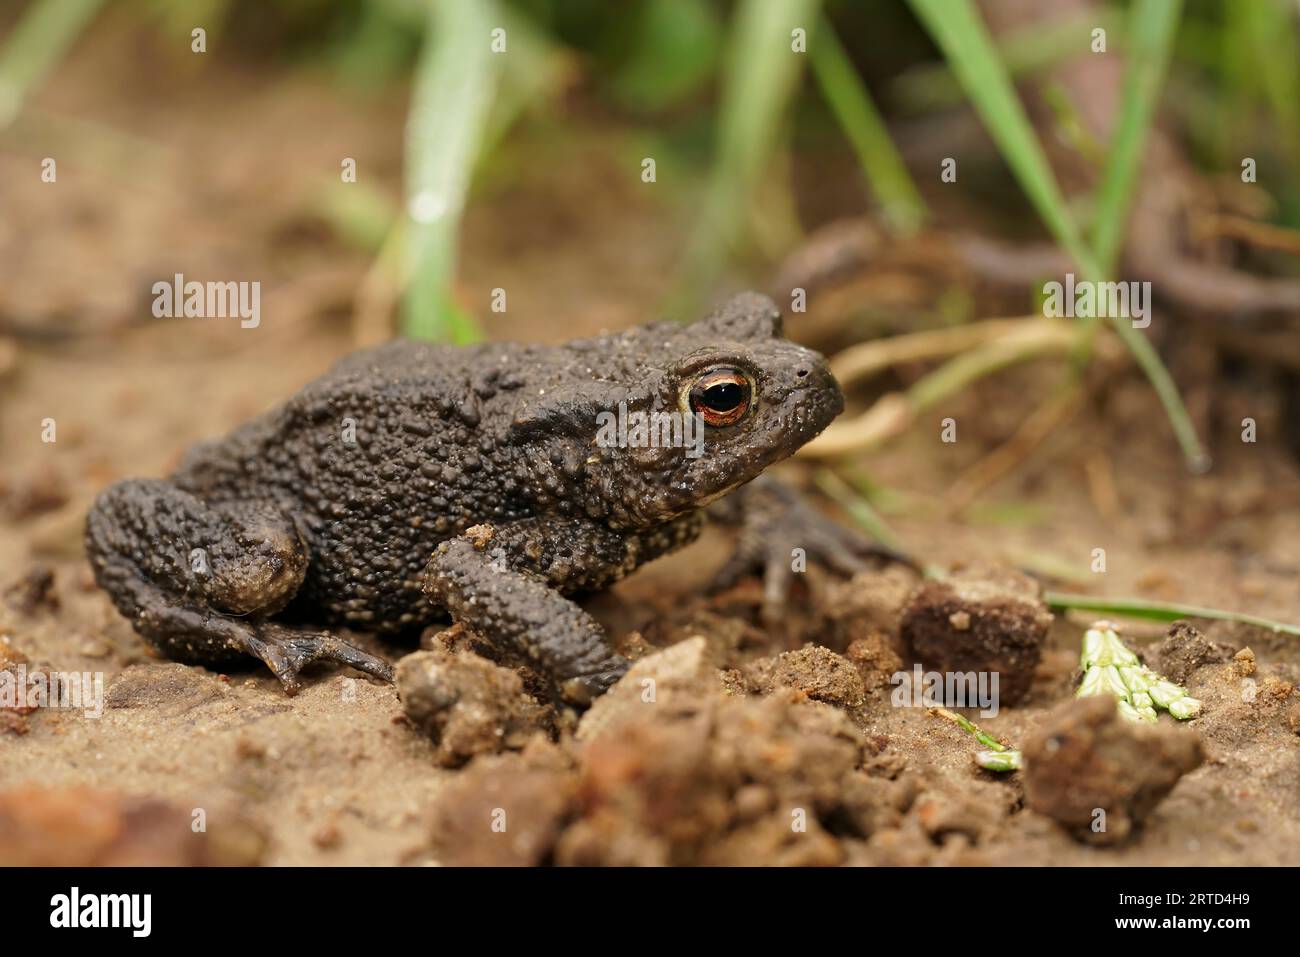 Natural full animal closeup on a brown male European common toad , Bufo bufo sitting on the ground in the garden Stock Photo